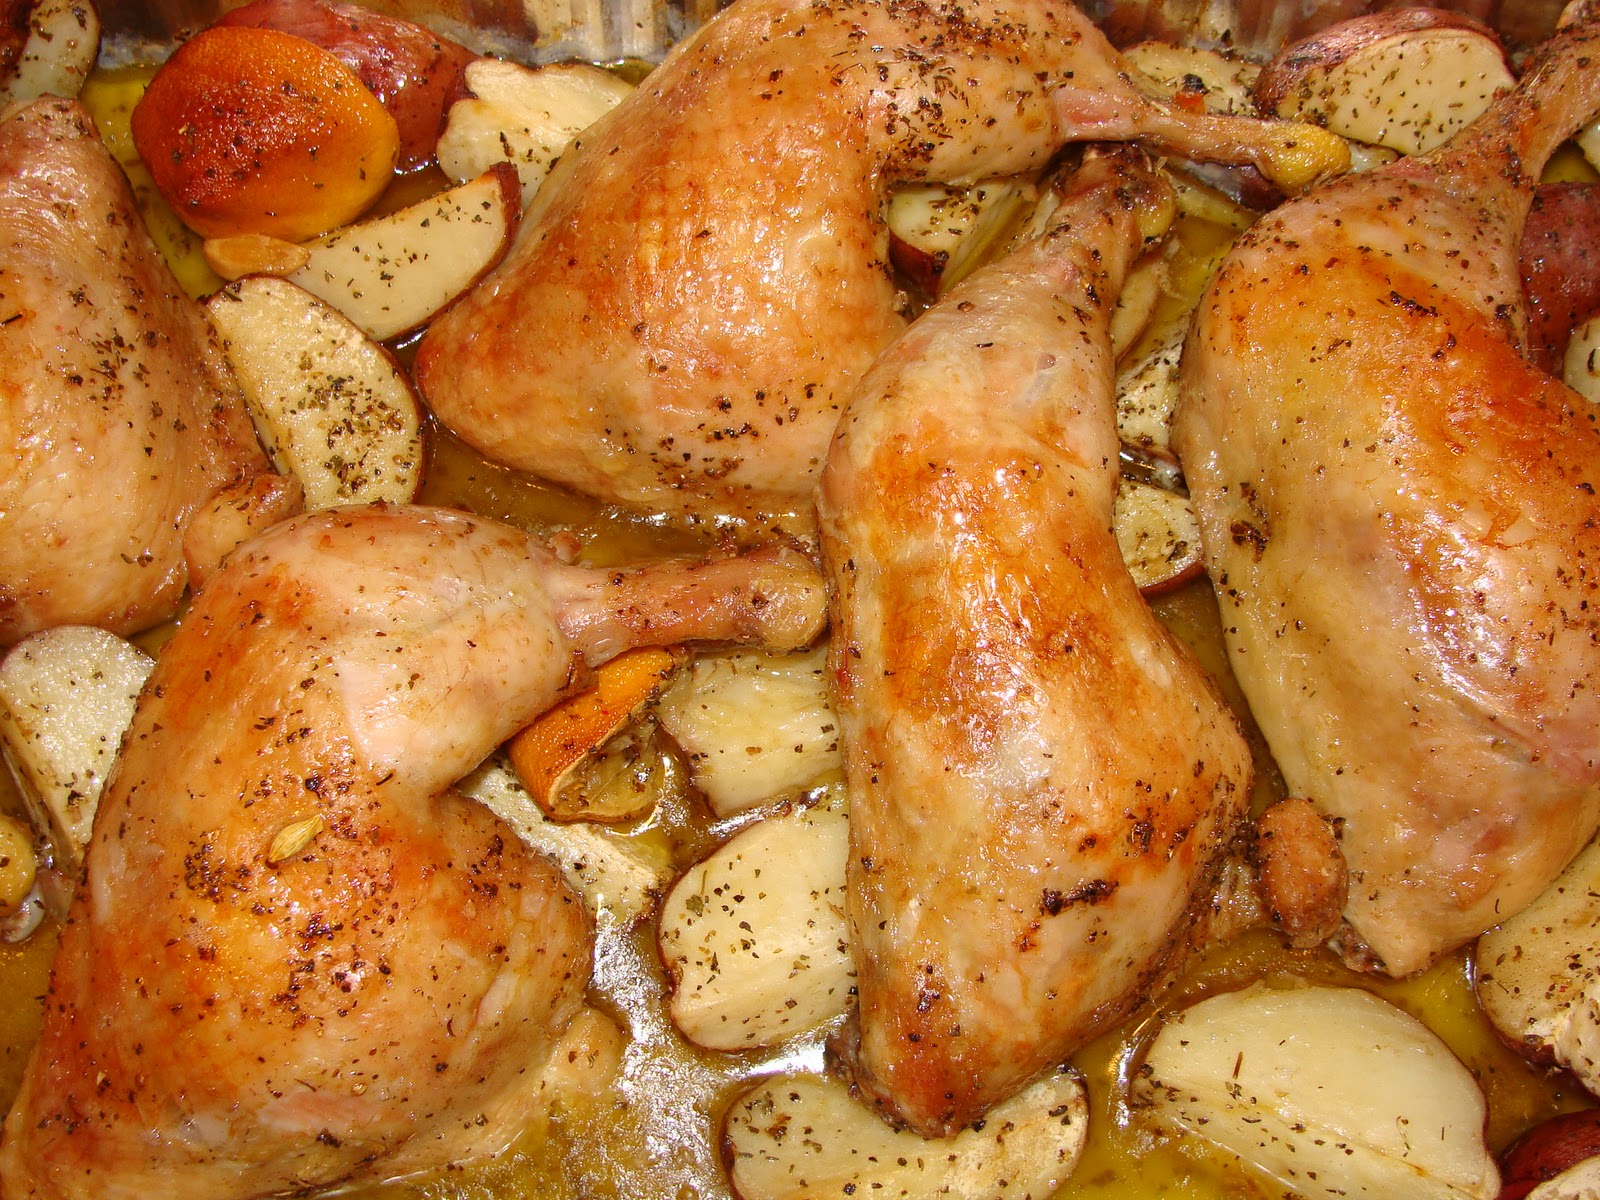 Greel roasted chicken and potatoes recipe